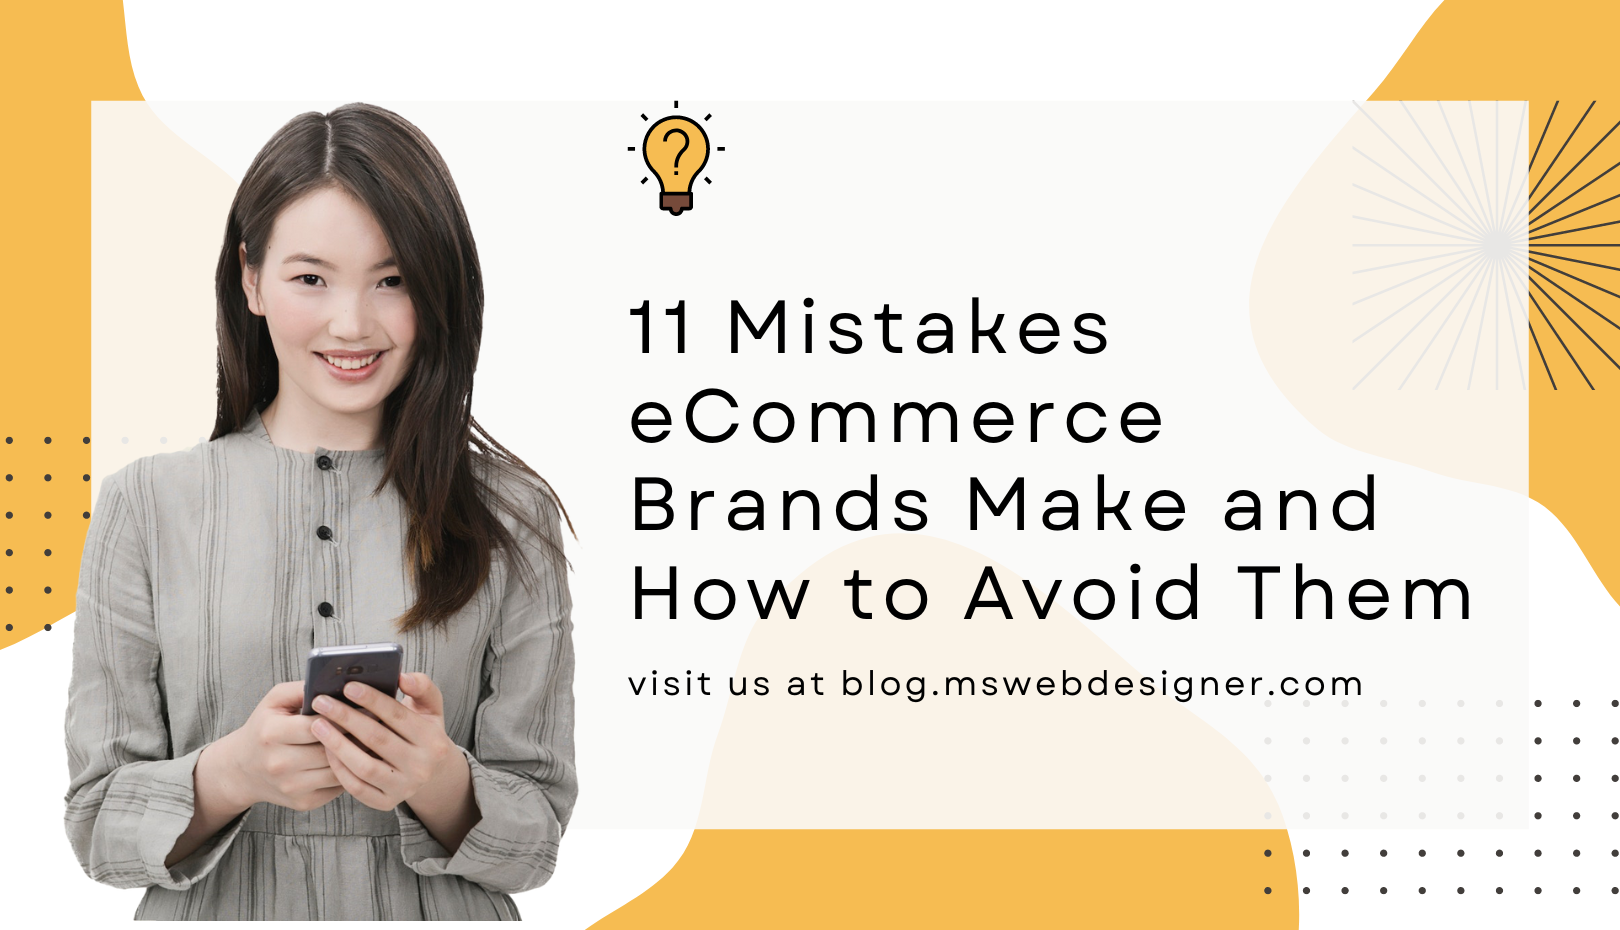 11 Mistakes eCommerce Brands Make and How to Avoid Them